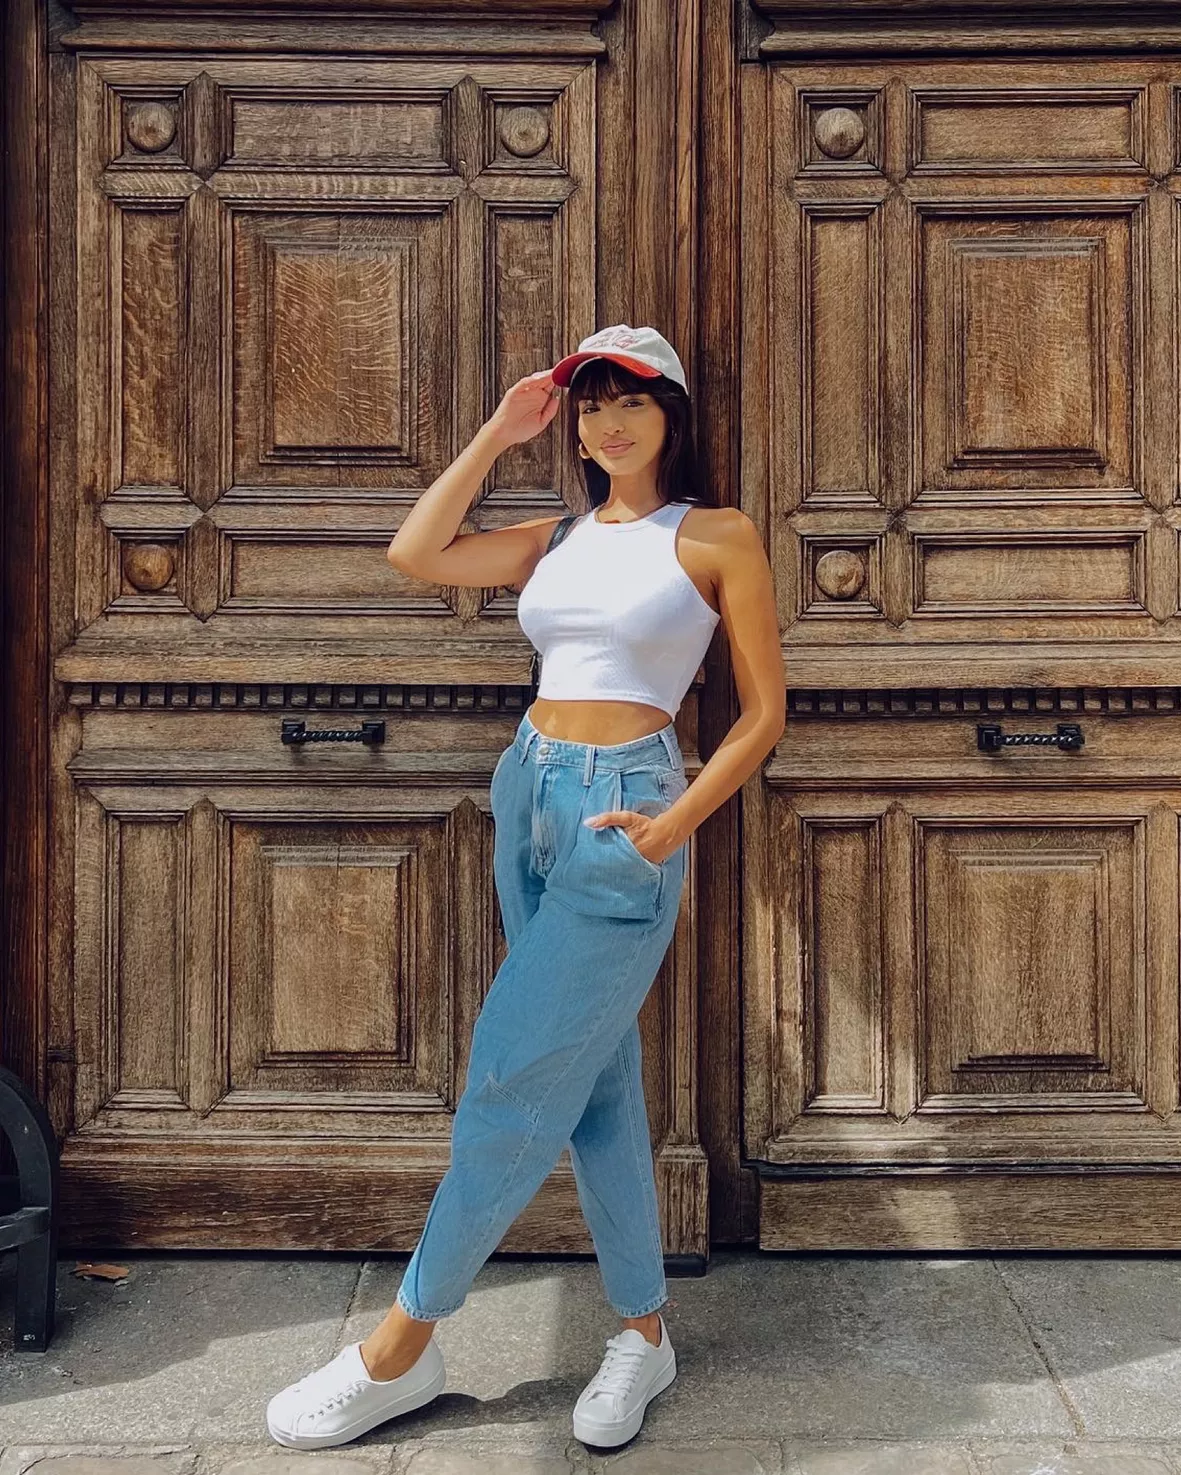 Outfit inspo for a city break  Tube top and jeans, Tube top